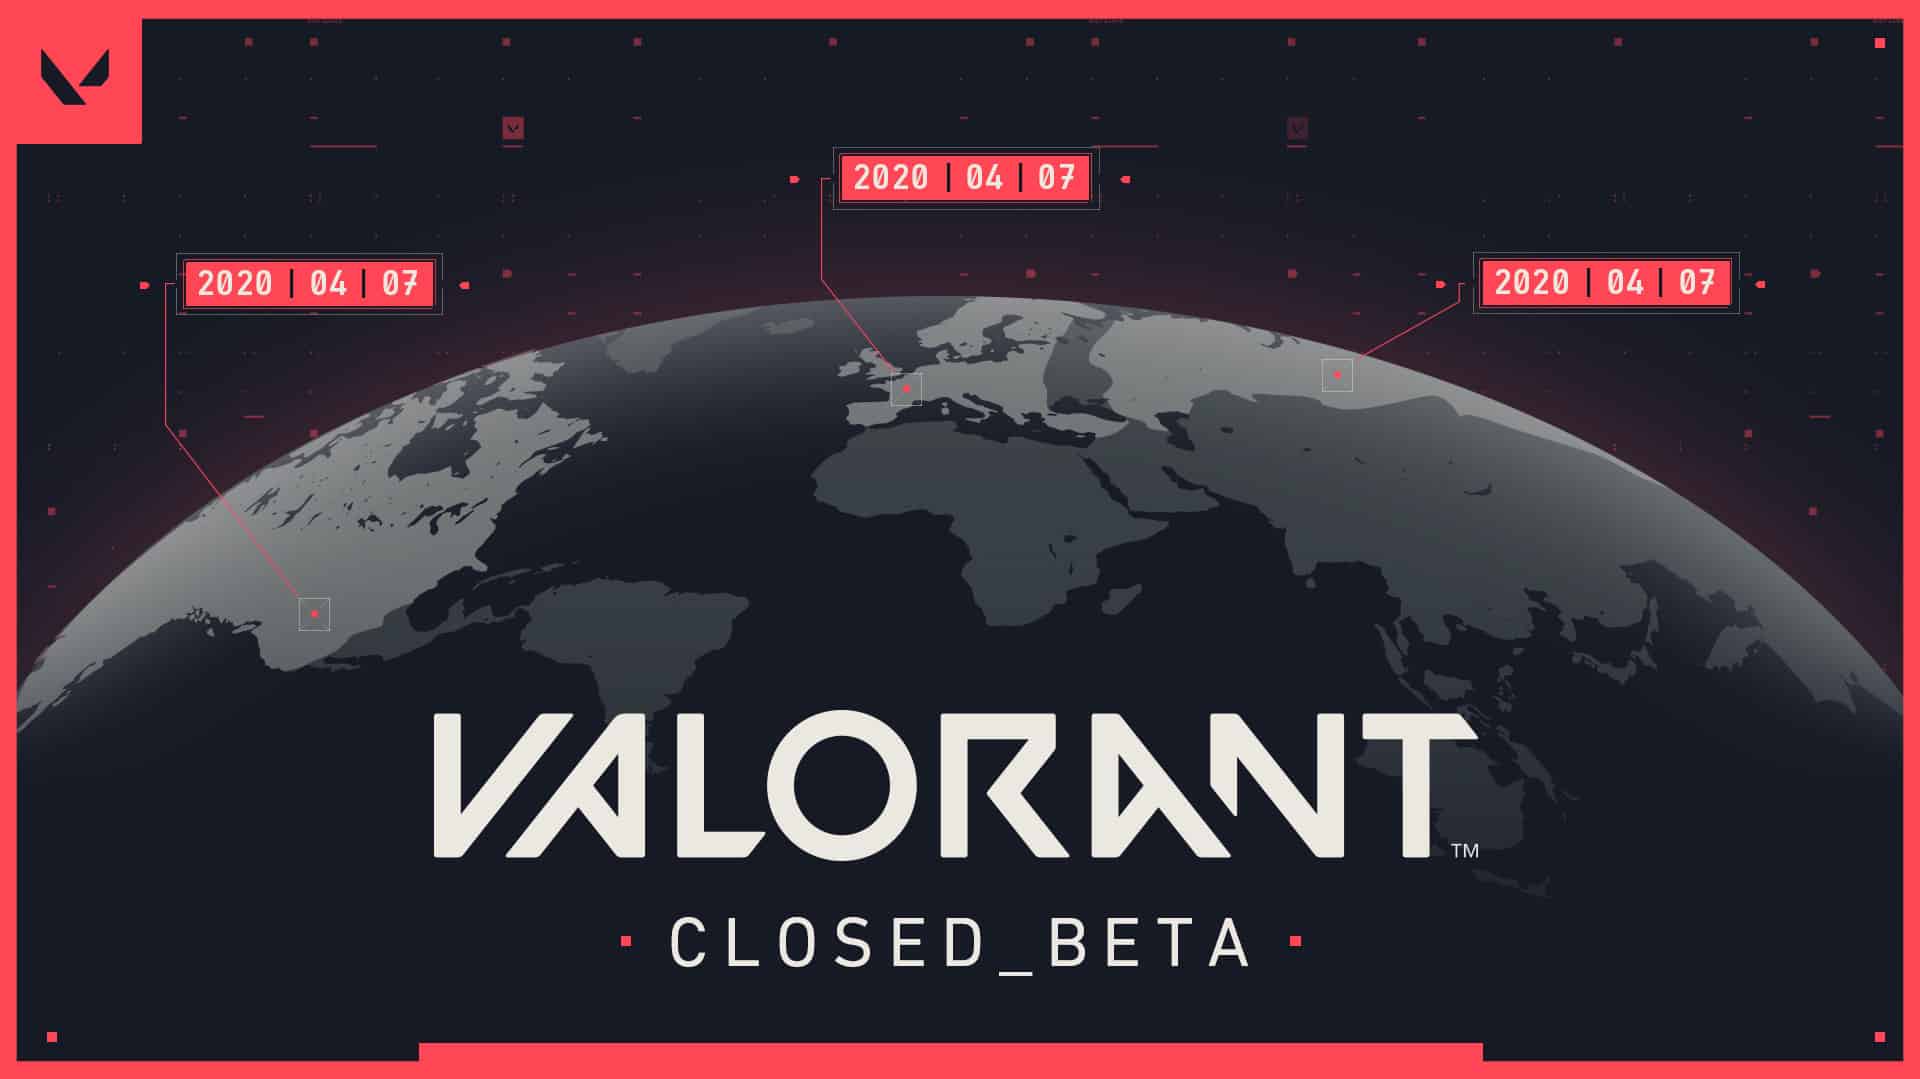 Valorant Beta Announce 1Map 6x9 1920x1080 in article image